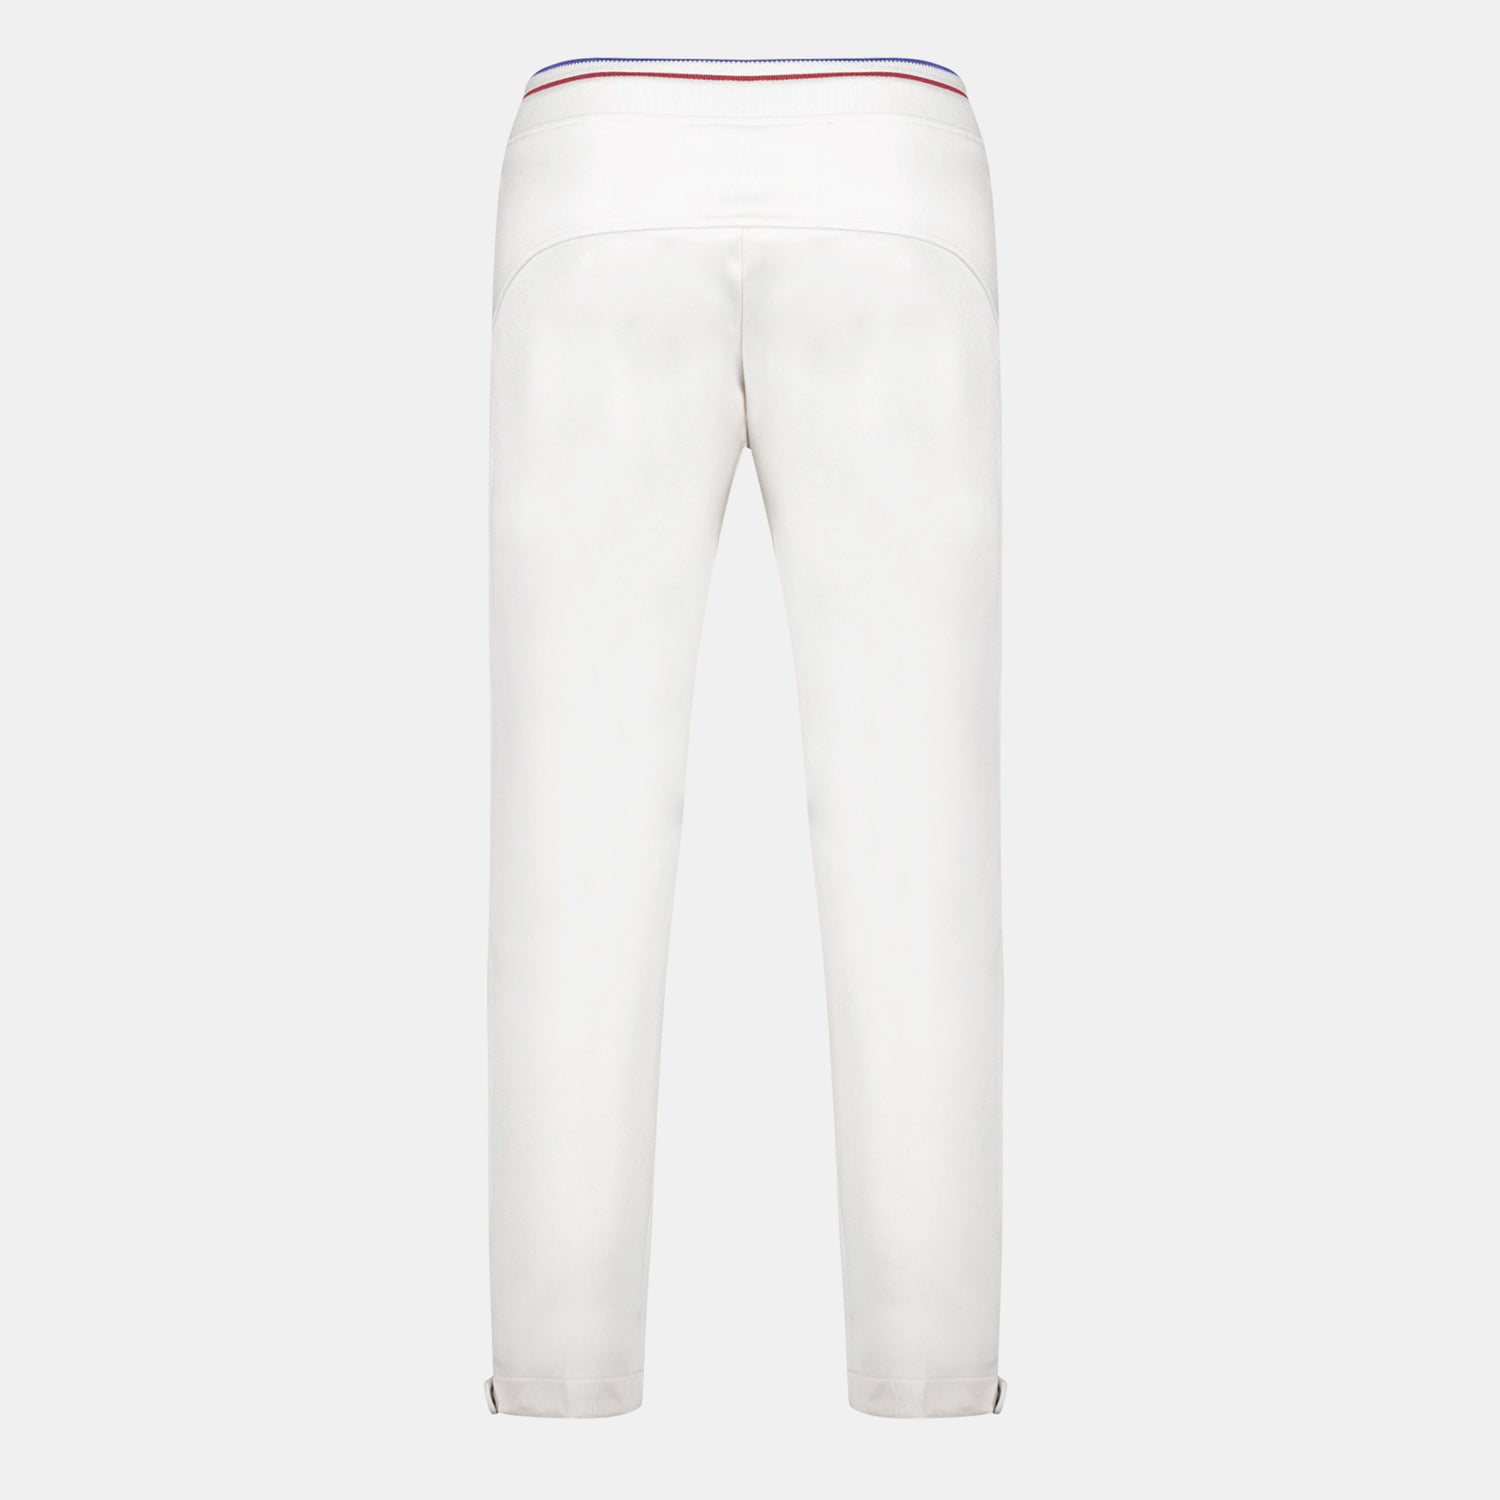 2421031-EFRO 24 Pant N°4 W écru  | Trousers for women